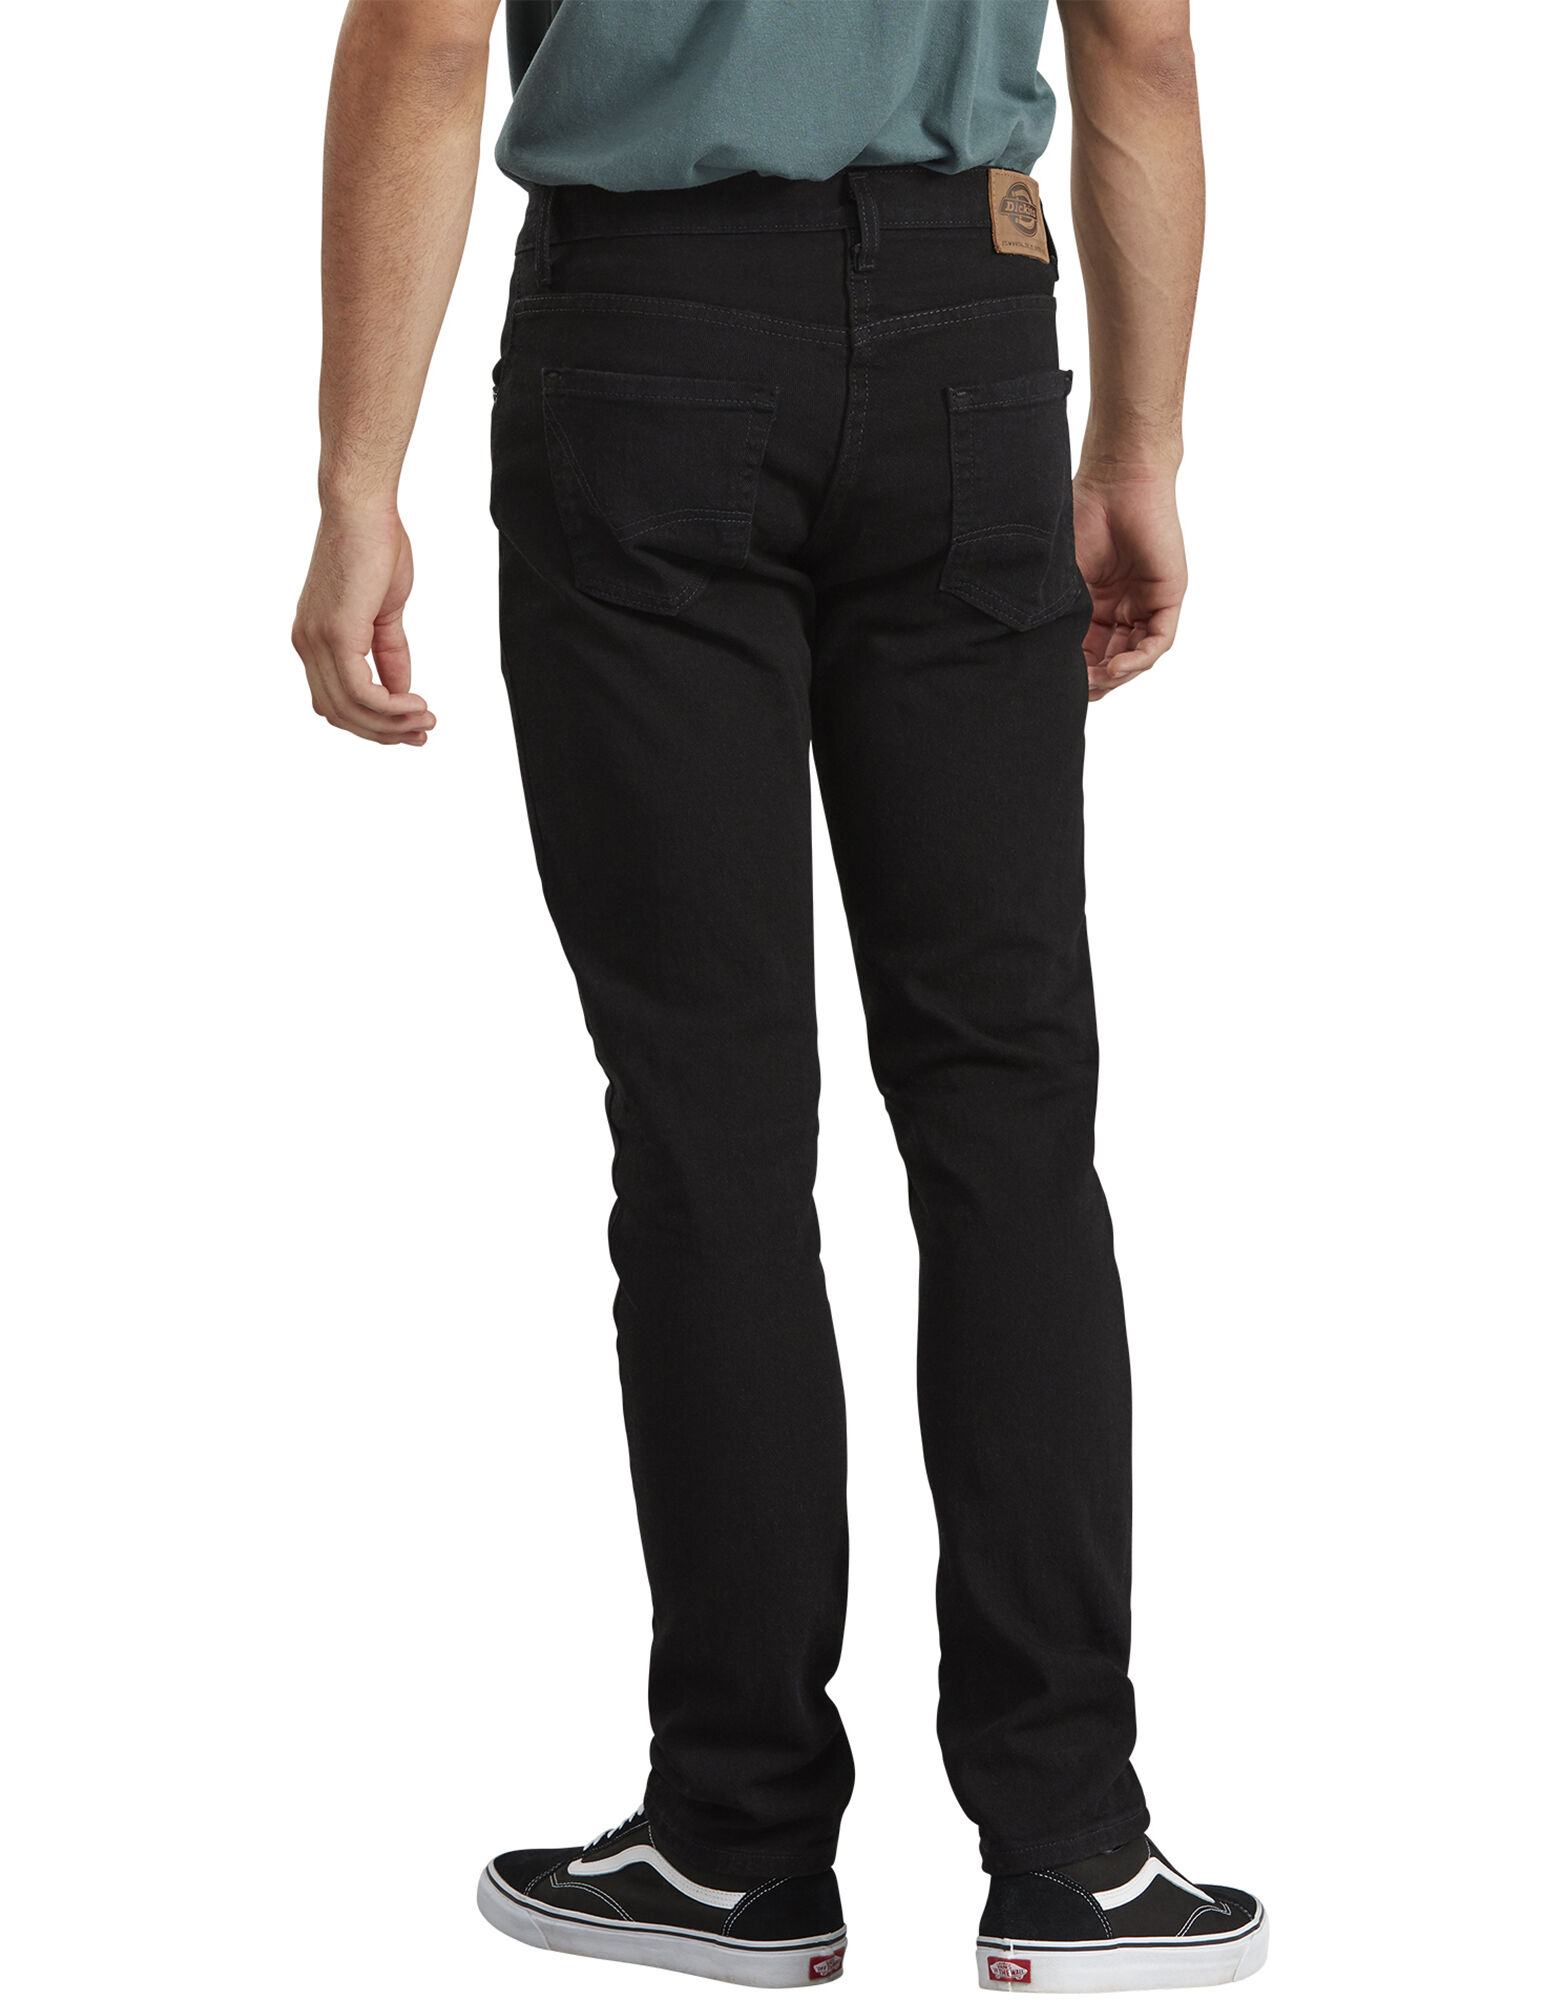 Stretch Skinny Jeans For Men Dickies